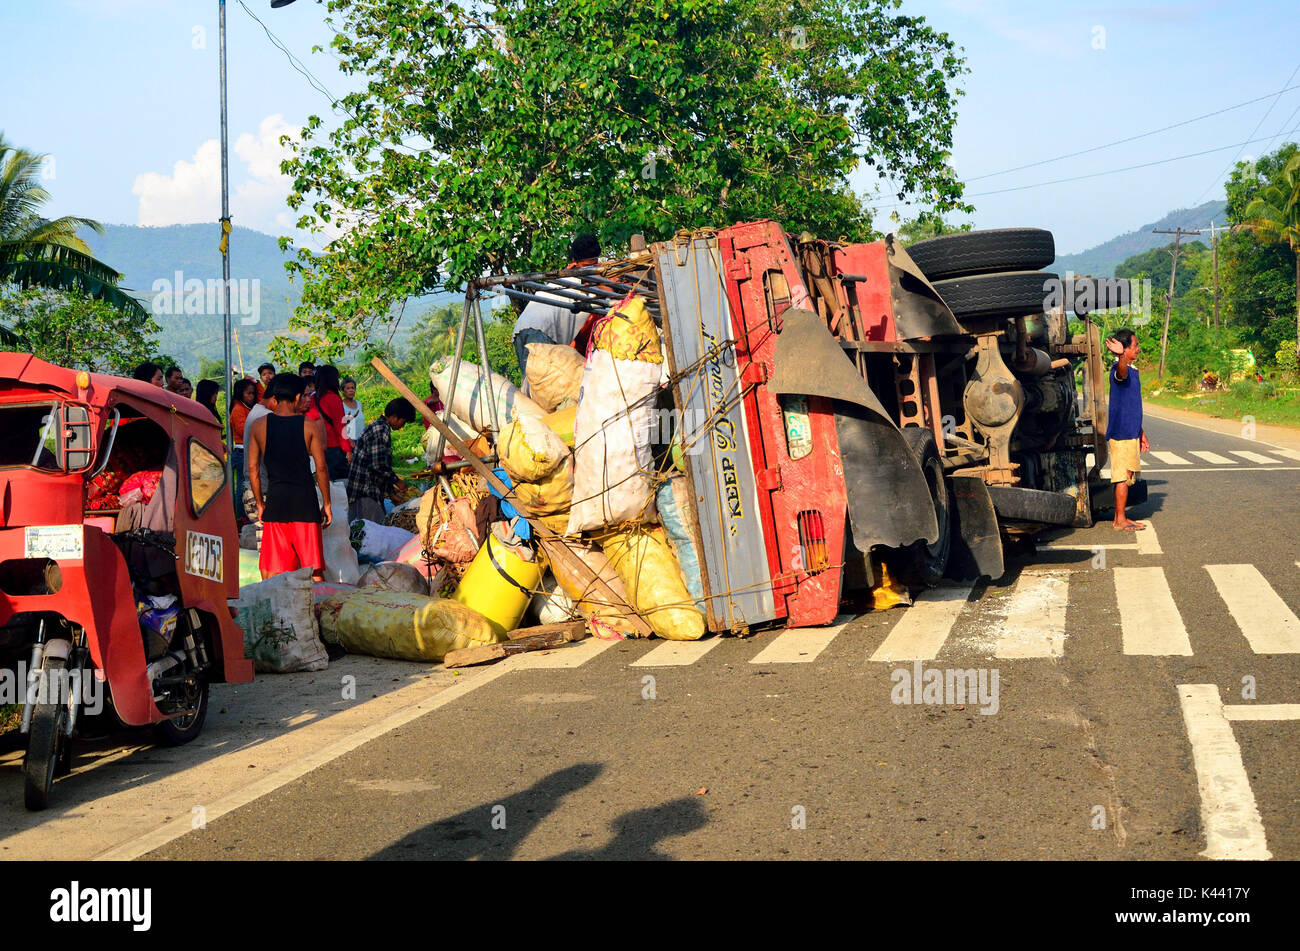 SISON, PHILIPPINES - 16 OCT 2012 Overturned truck on road in Mindinao with bystanders. Road accident leaves vehicle lying on side, with load spilled Stock Photo